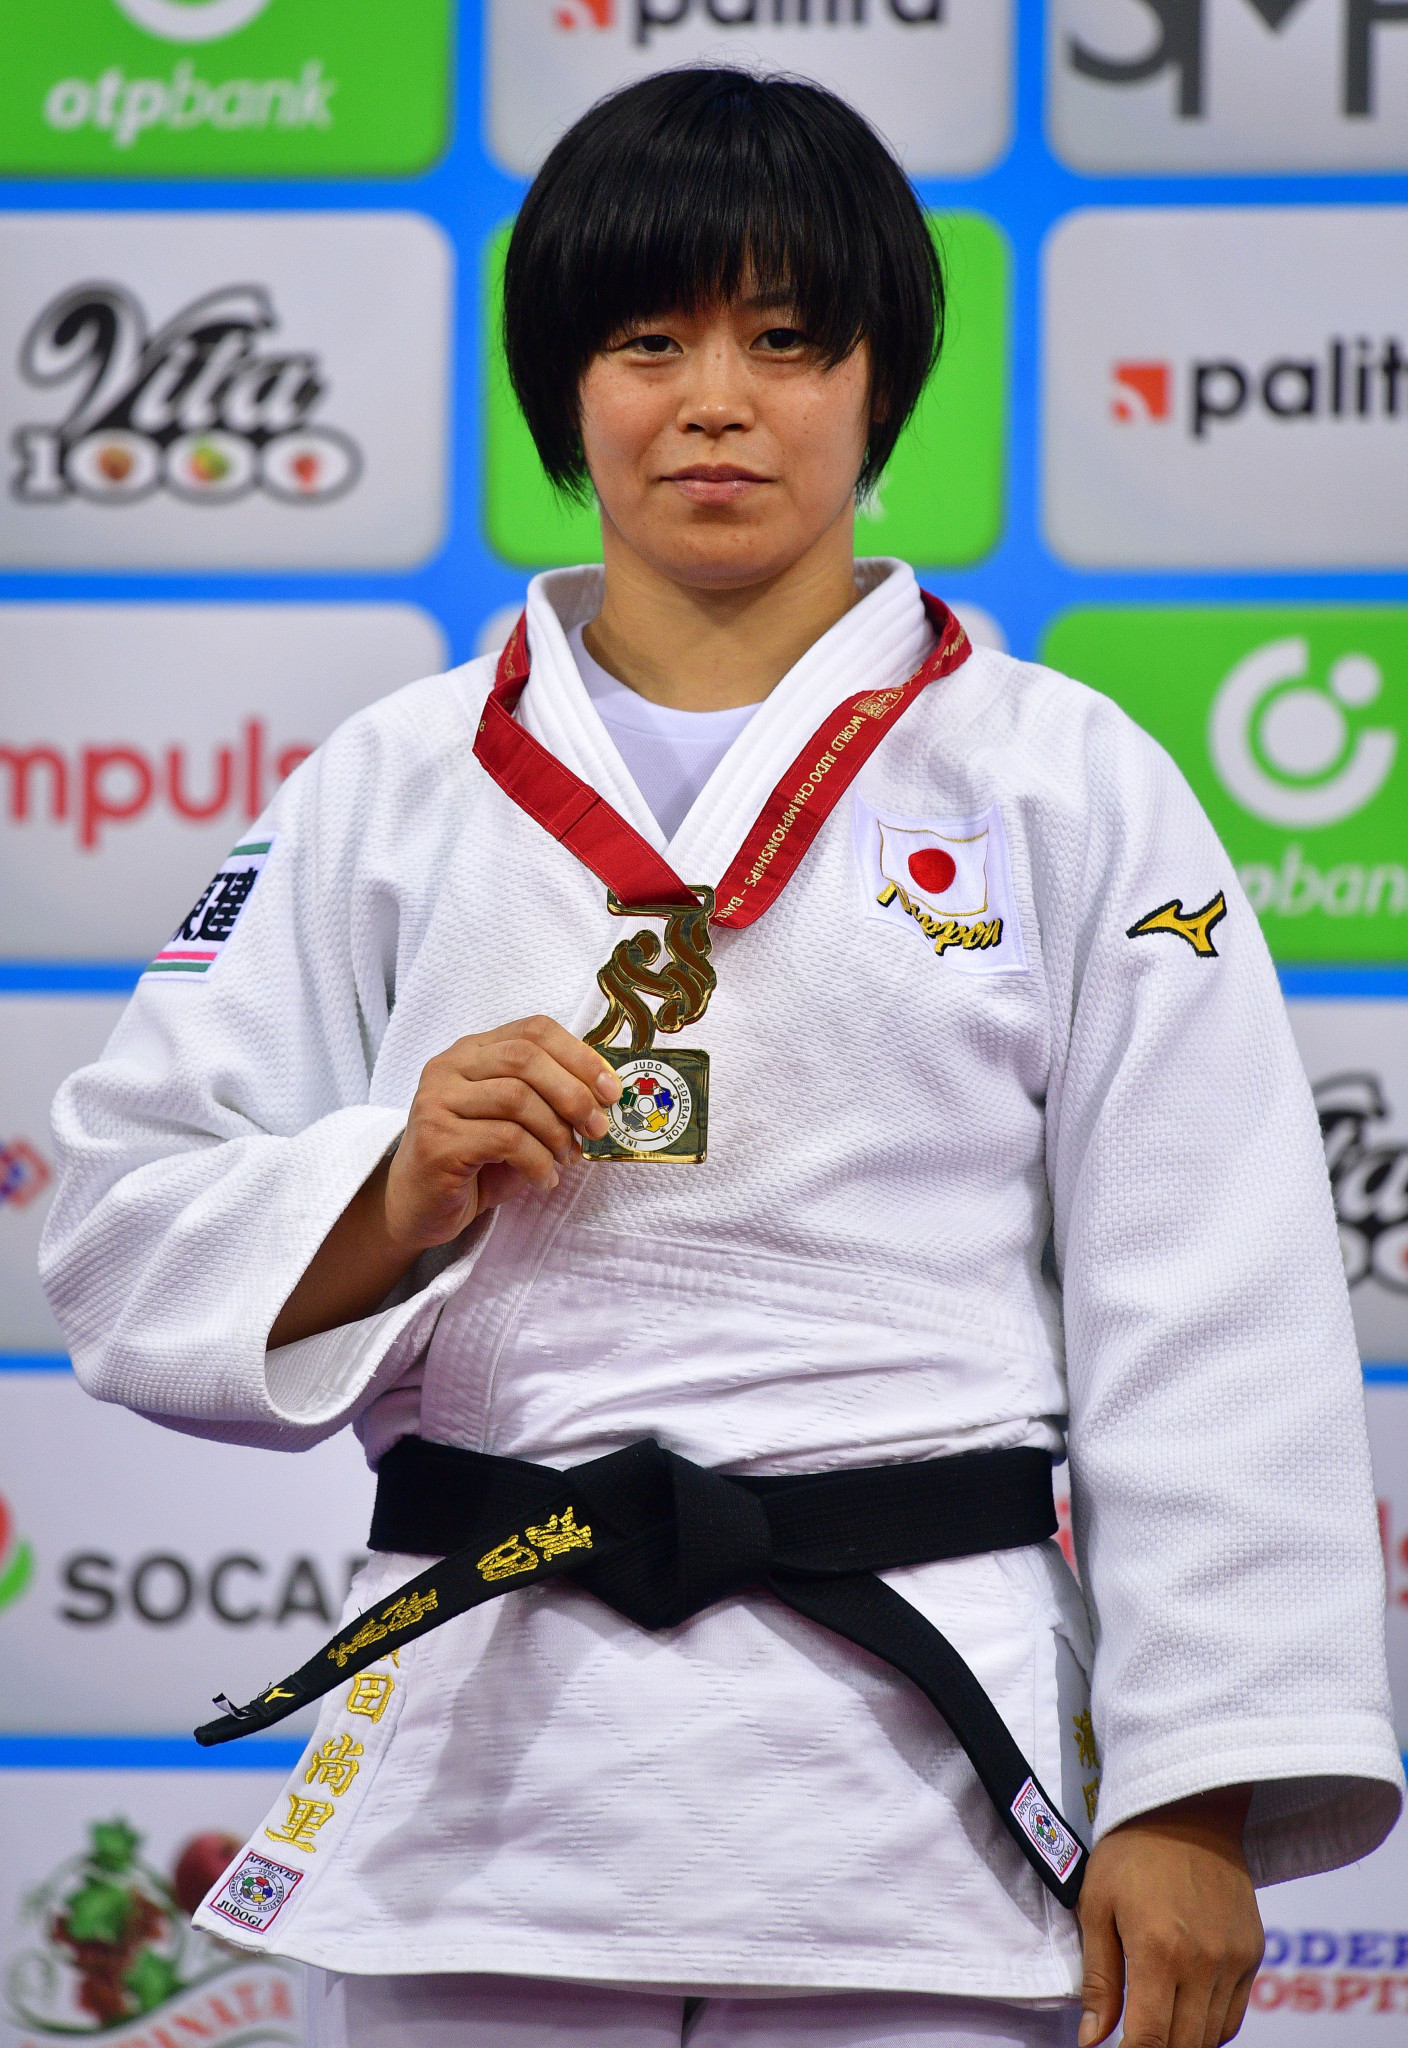 Japan's Shori Hamada wins gold at her first World Championships Six golds on day six for Japan at World Judo Championships ©Getty Images